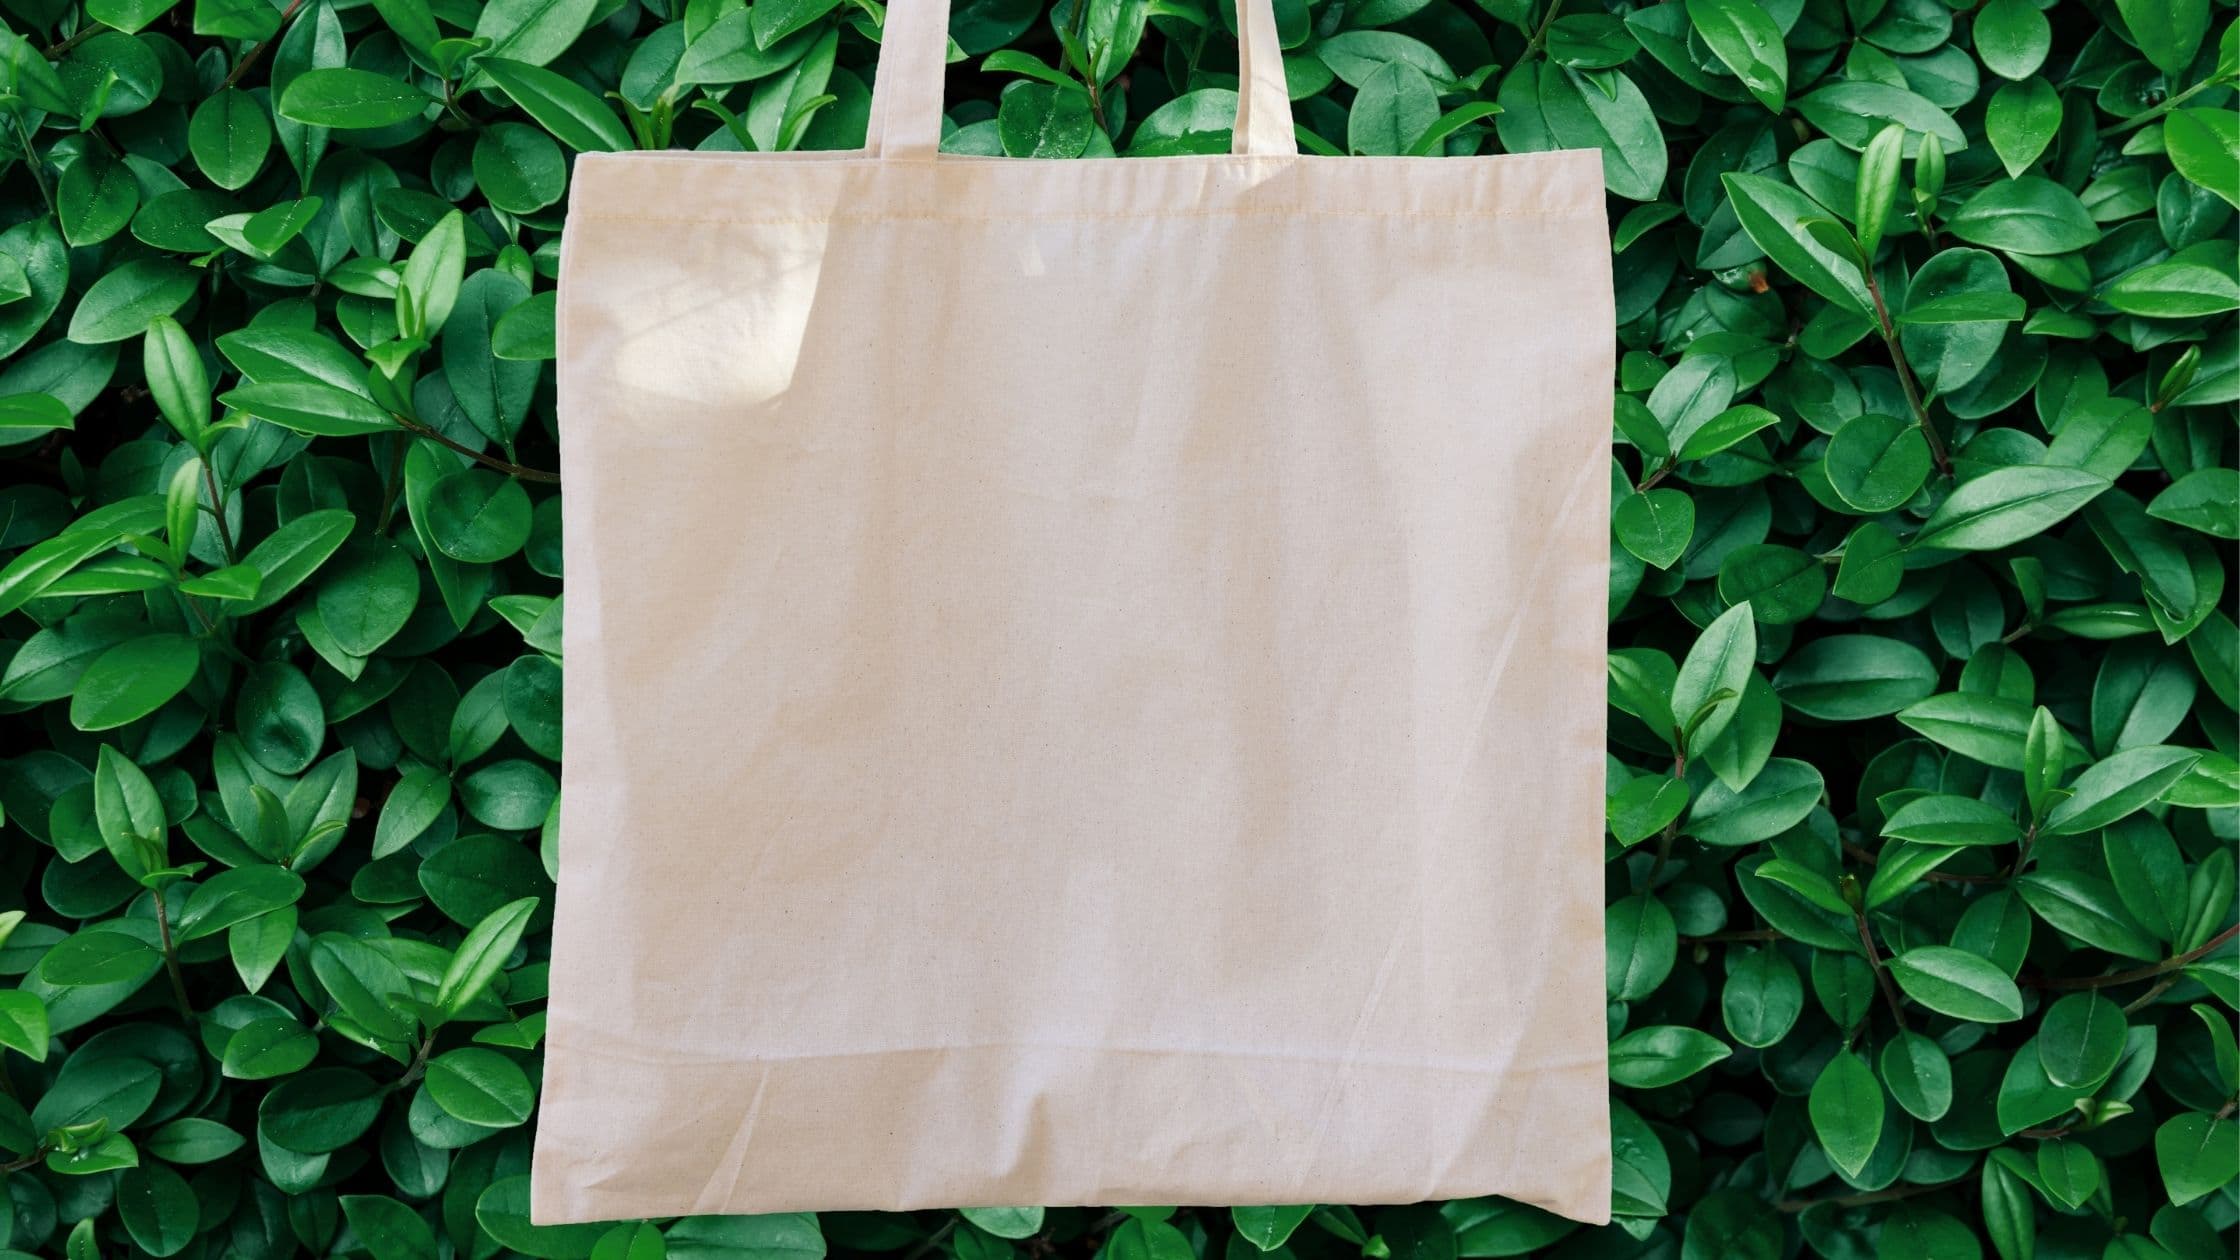 Reusable grocery bags aren't as environmentally friendly as you might think